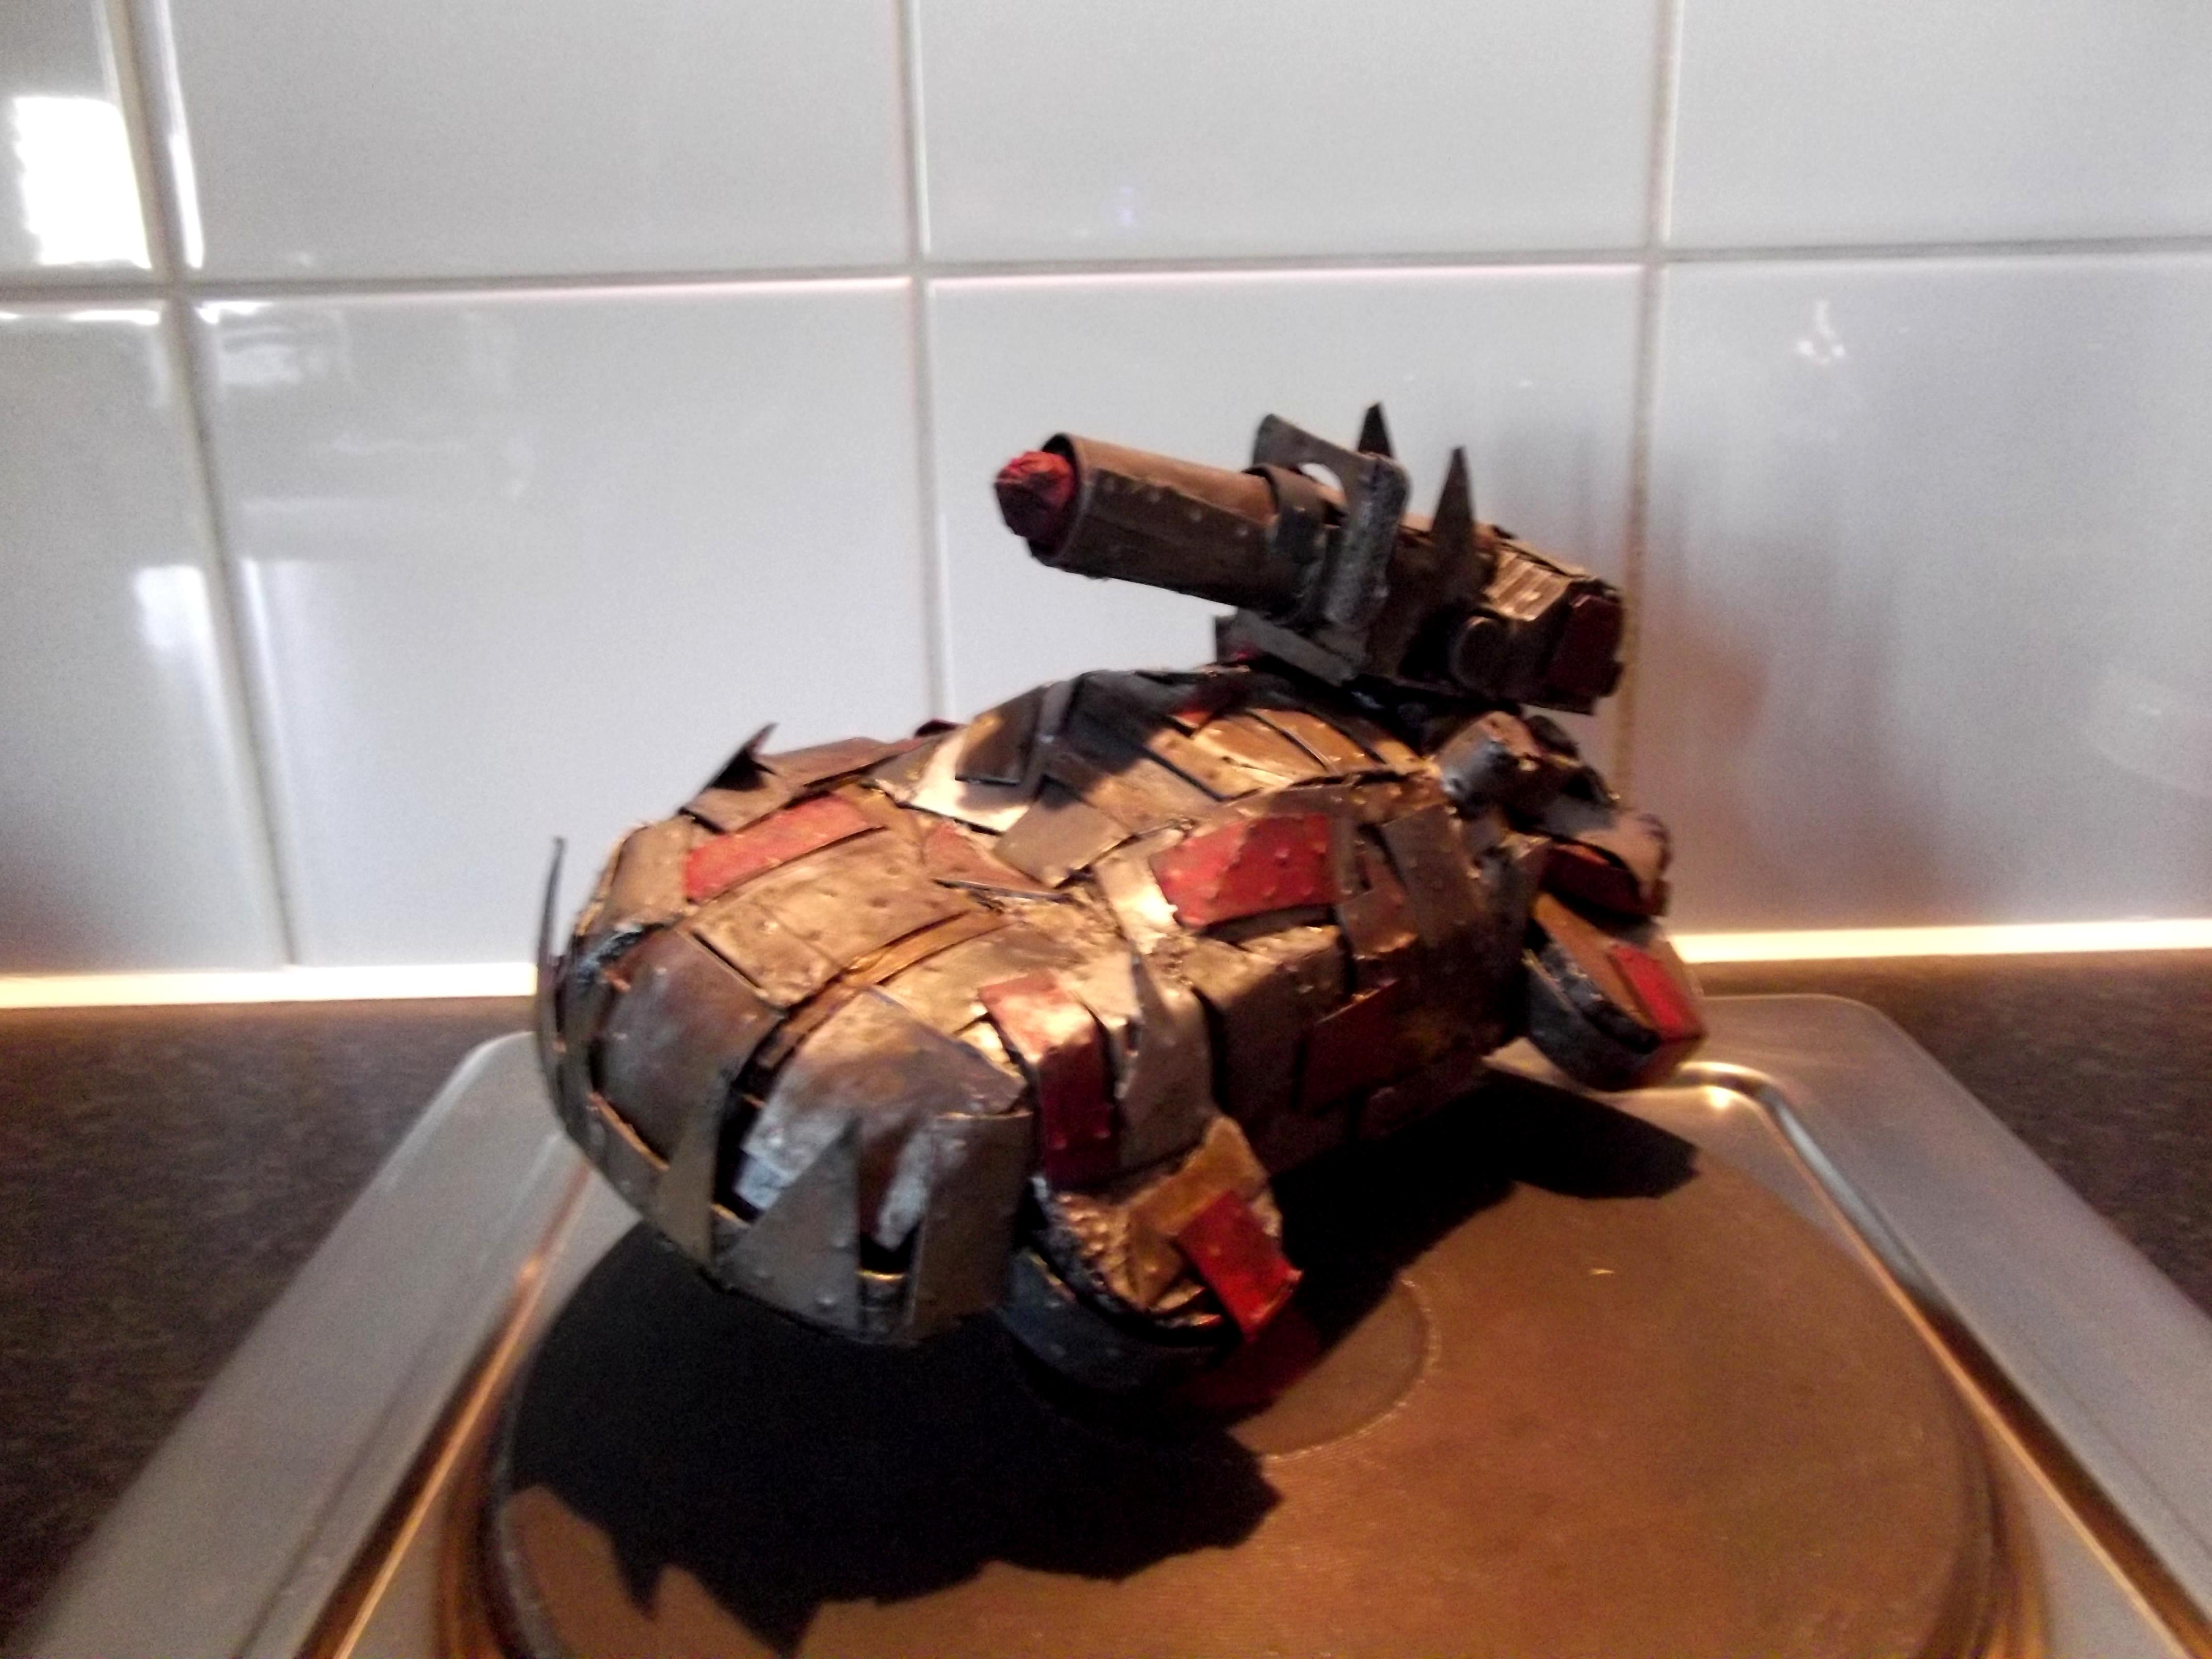 Boomgun, Conversion, Hover, Looted Wagon, Orks, Scratch Build, Warhammer 40,000